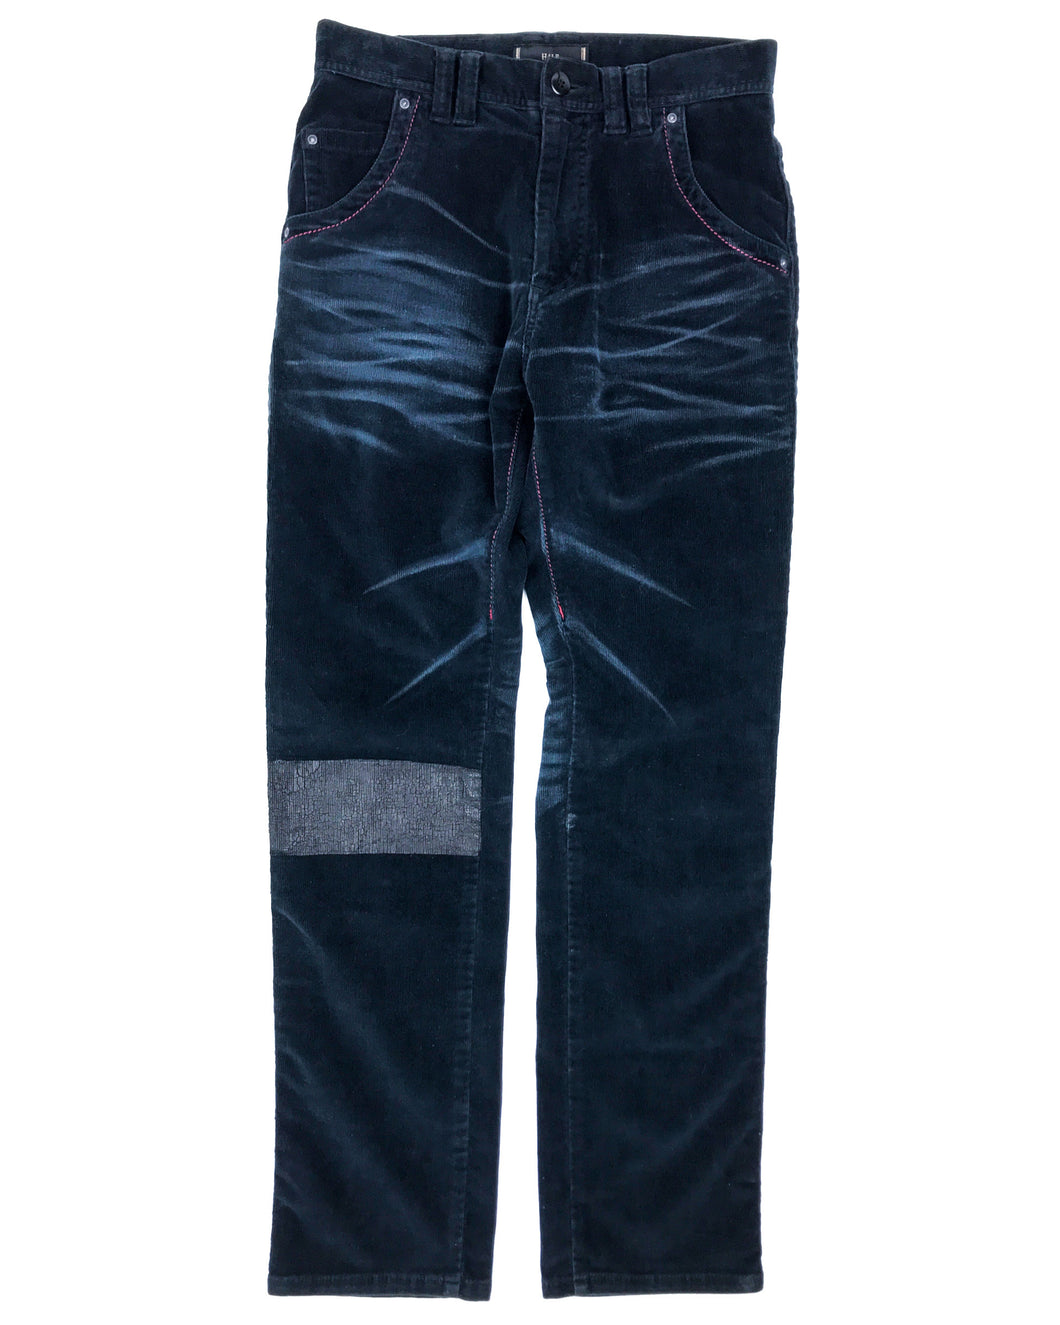 HALB Rubber Painted Corduroy Pants (Late 90’s - Early 00’s)